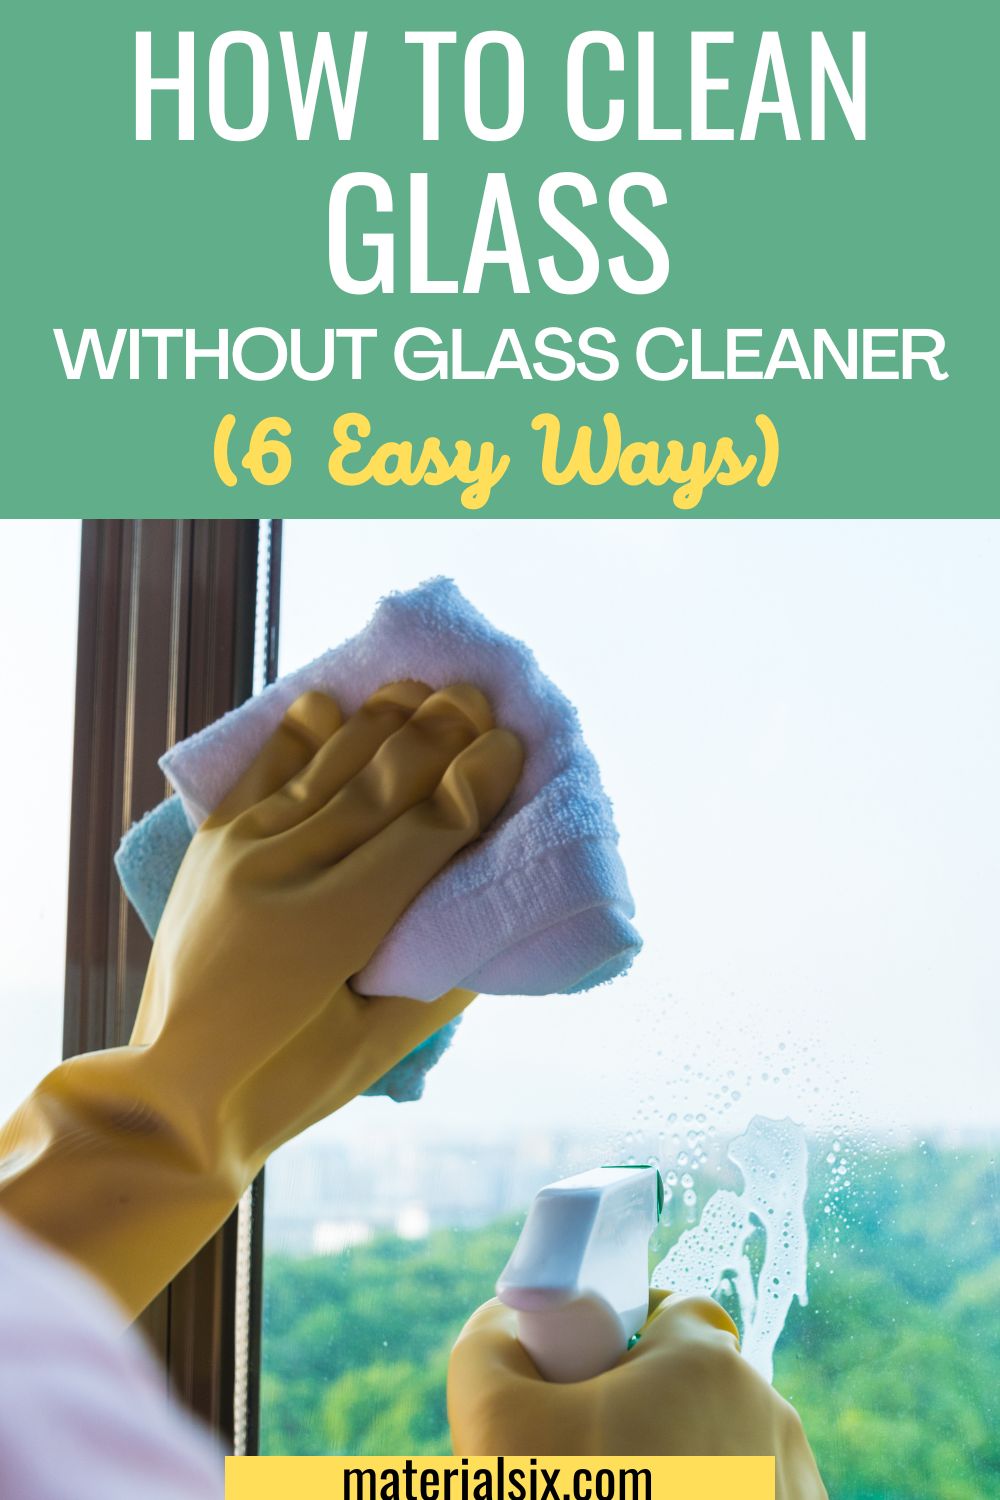 How to Clean Glass Without Glass Cleaner